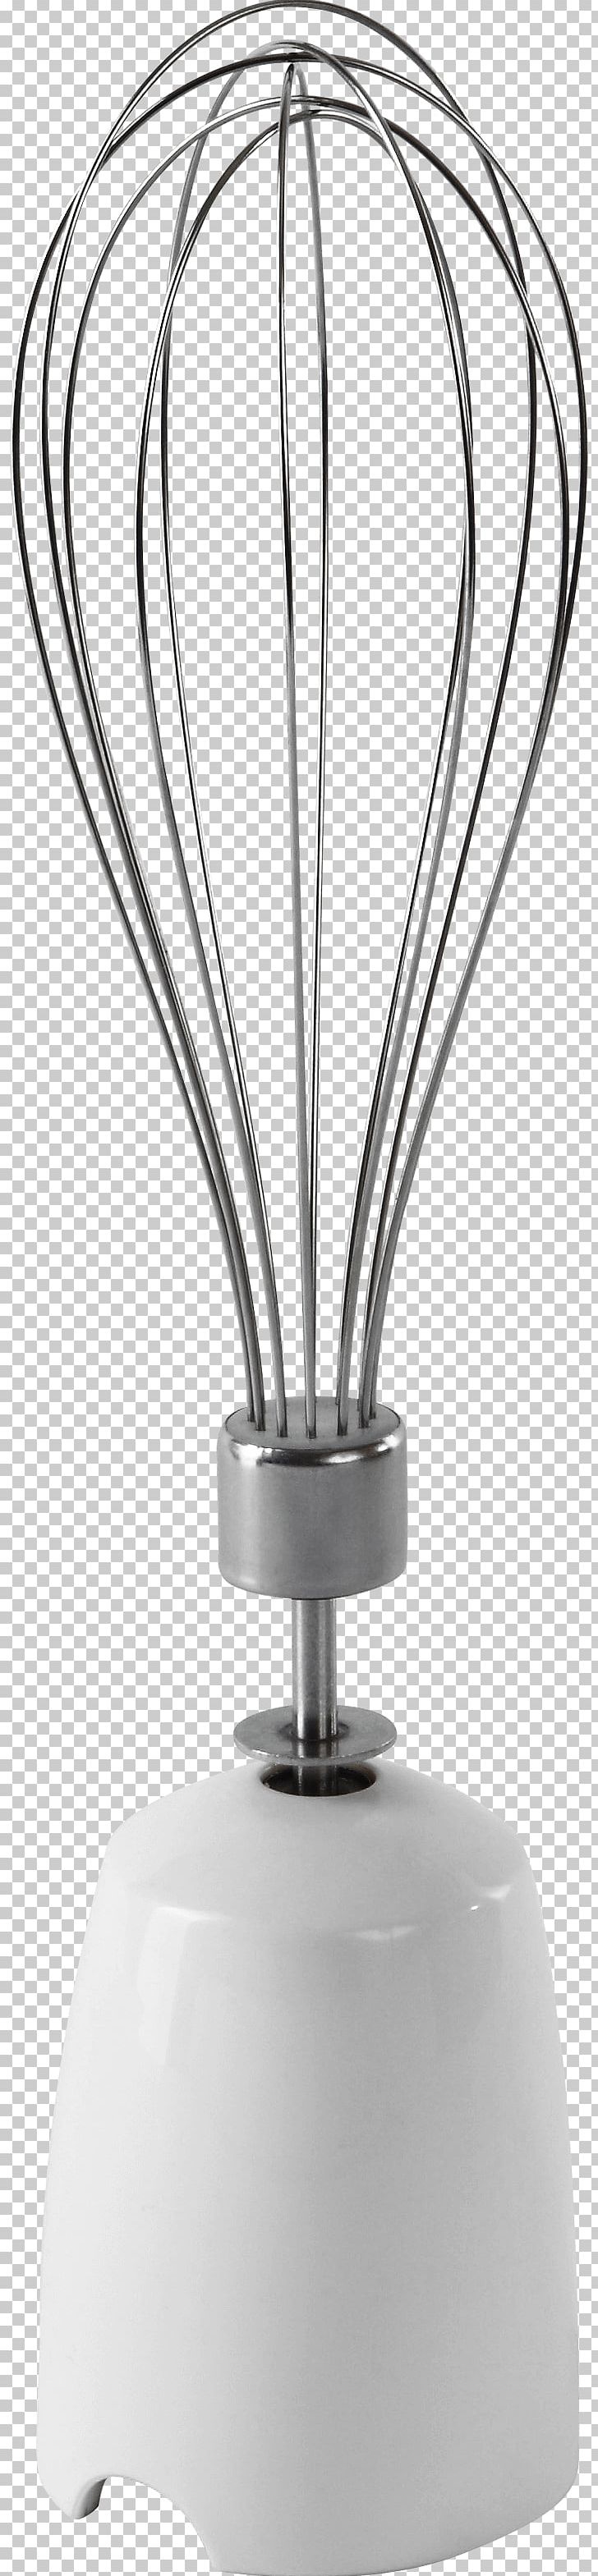 Blender Mixer Small Appliance Stainless Steel Bowl PNG, Clipart, Black And White, Blender, Bowl, Liter, Milliliter Free PNG Download